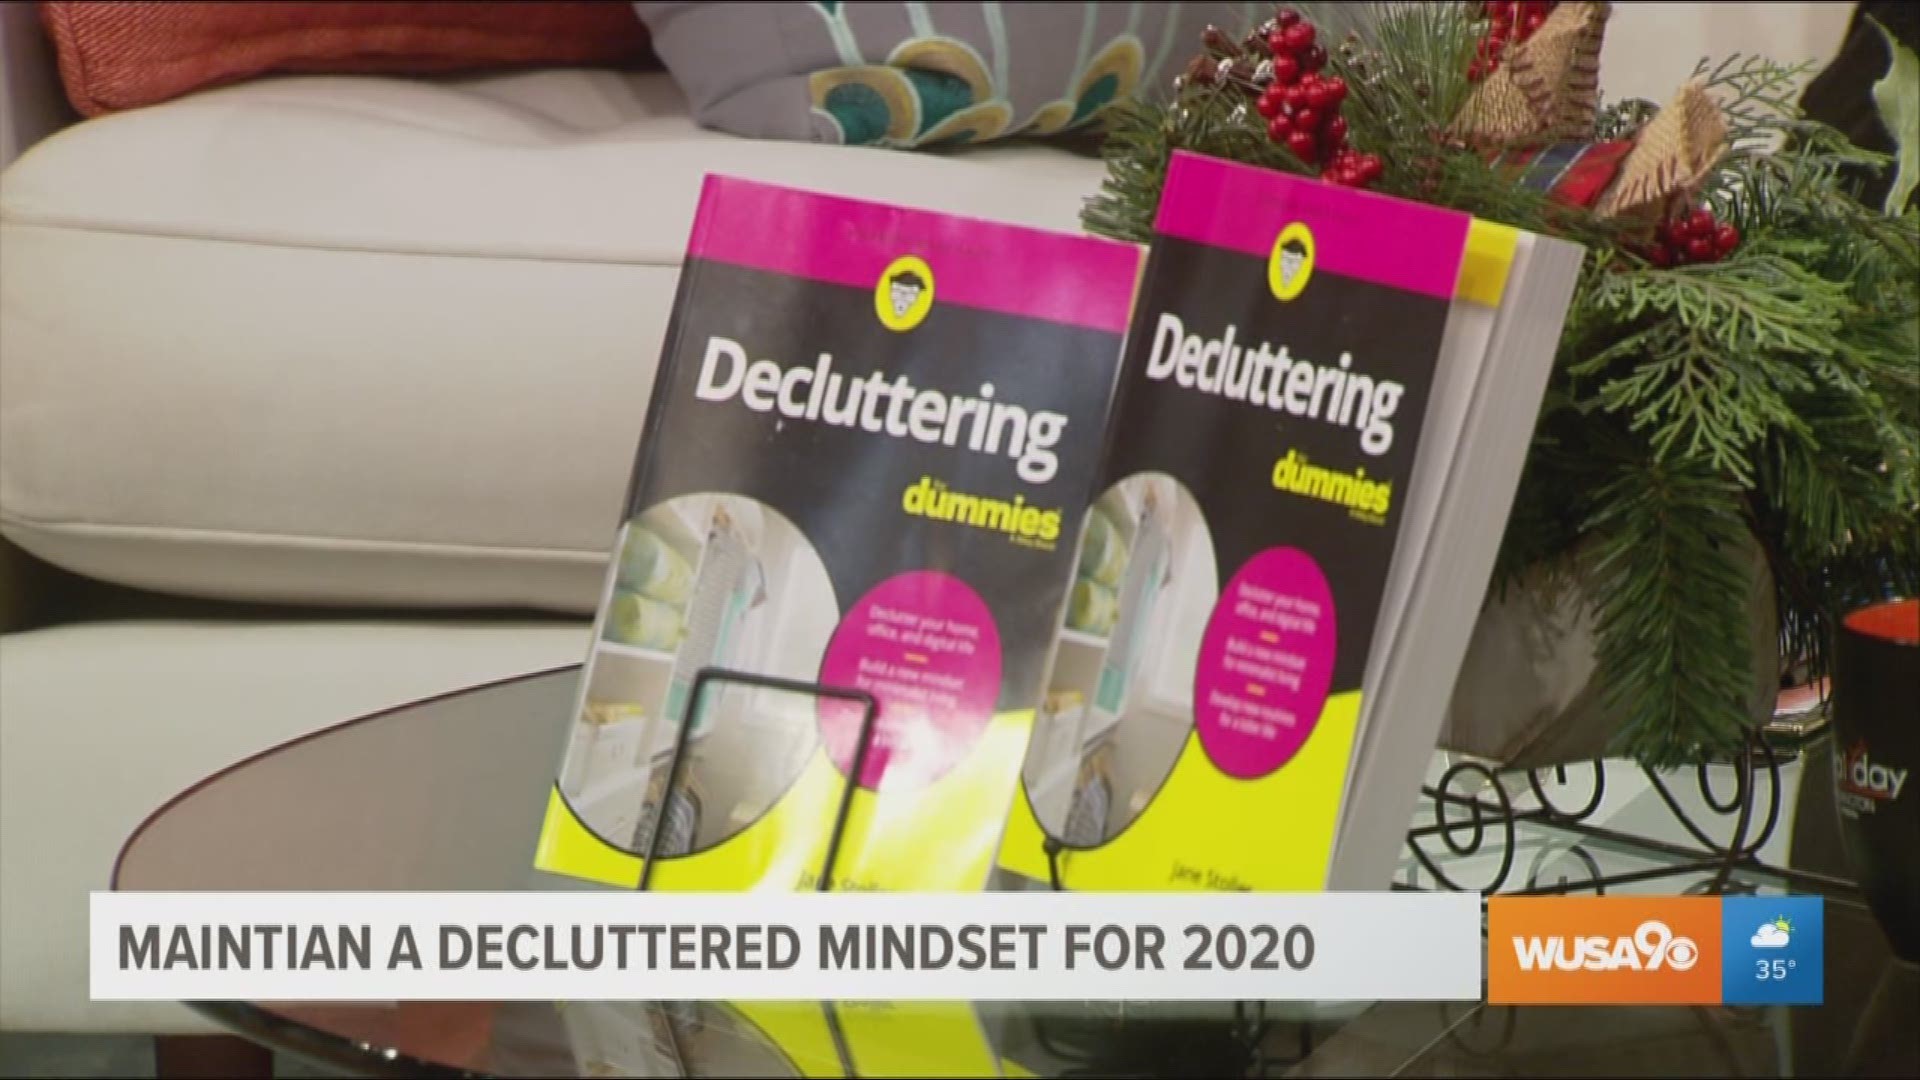 Lifestyle business organizer Jane Stoller provides some top tips in her new book, Decluttering for Dummies to help you stay organized in the new year!